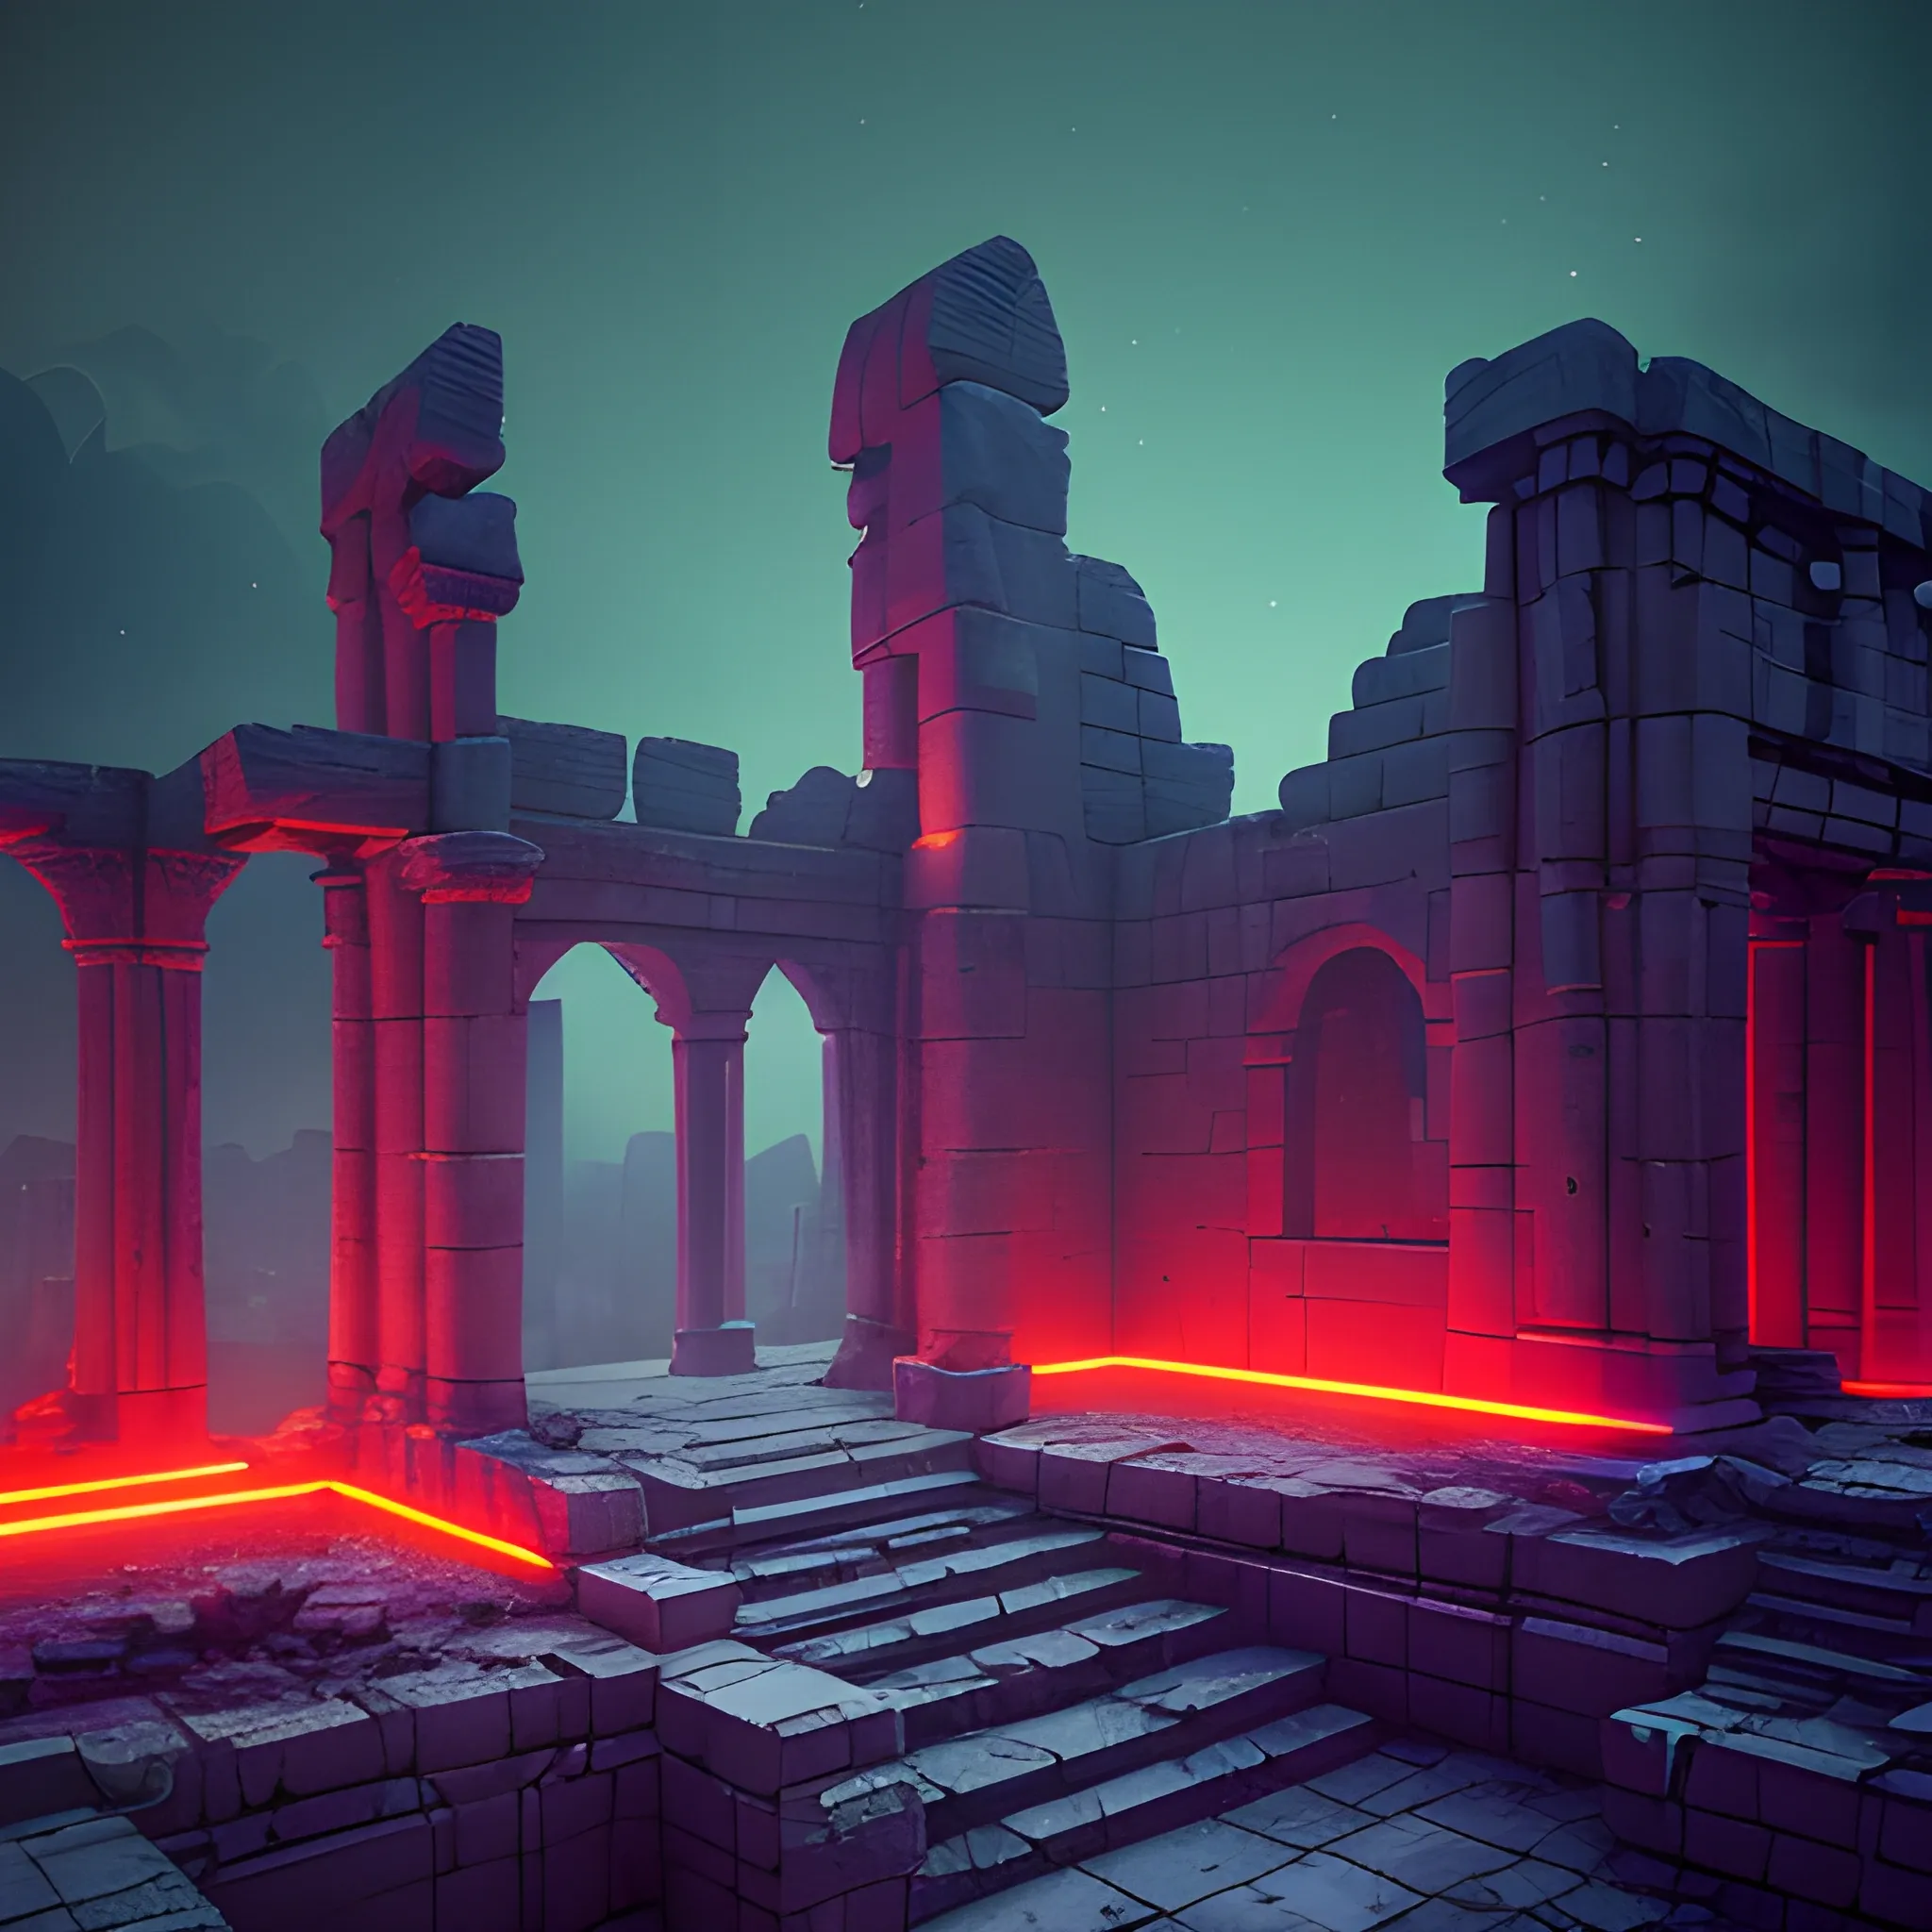 "Lonely Planet, Ruins, Ancient Civilization","Mysterious Illumination, Shimmering Red Light","Cinematic, Futuristic","3D","width": 960, "height": 540, "seed": "566136464", "step": "60", "version": "SH_Deliberate"